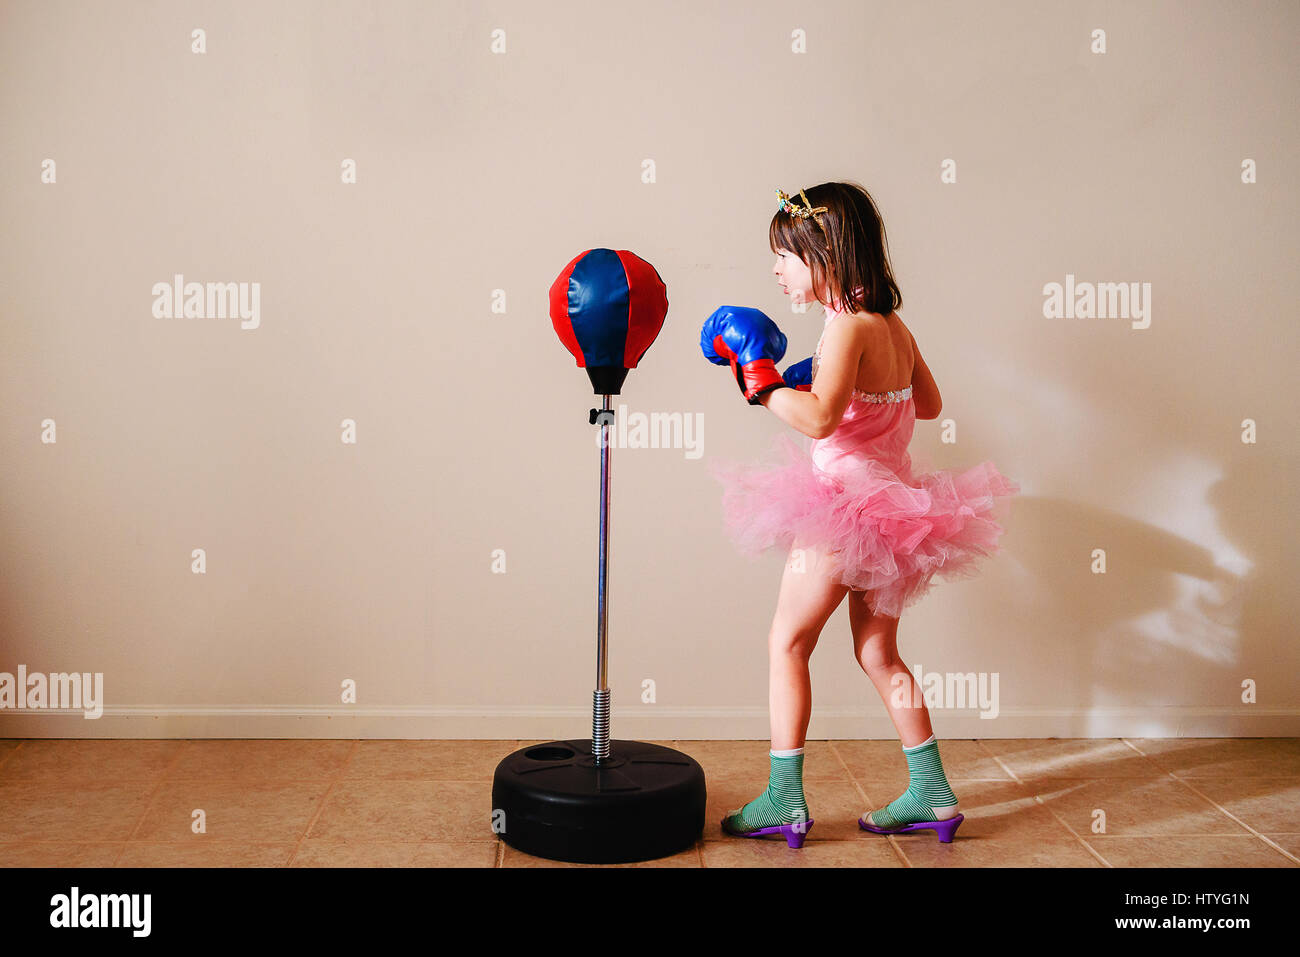 Girl in pink tutu and high heel shoes learning to box Stock Photo